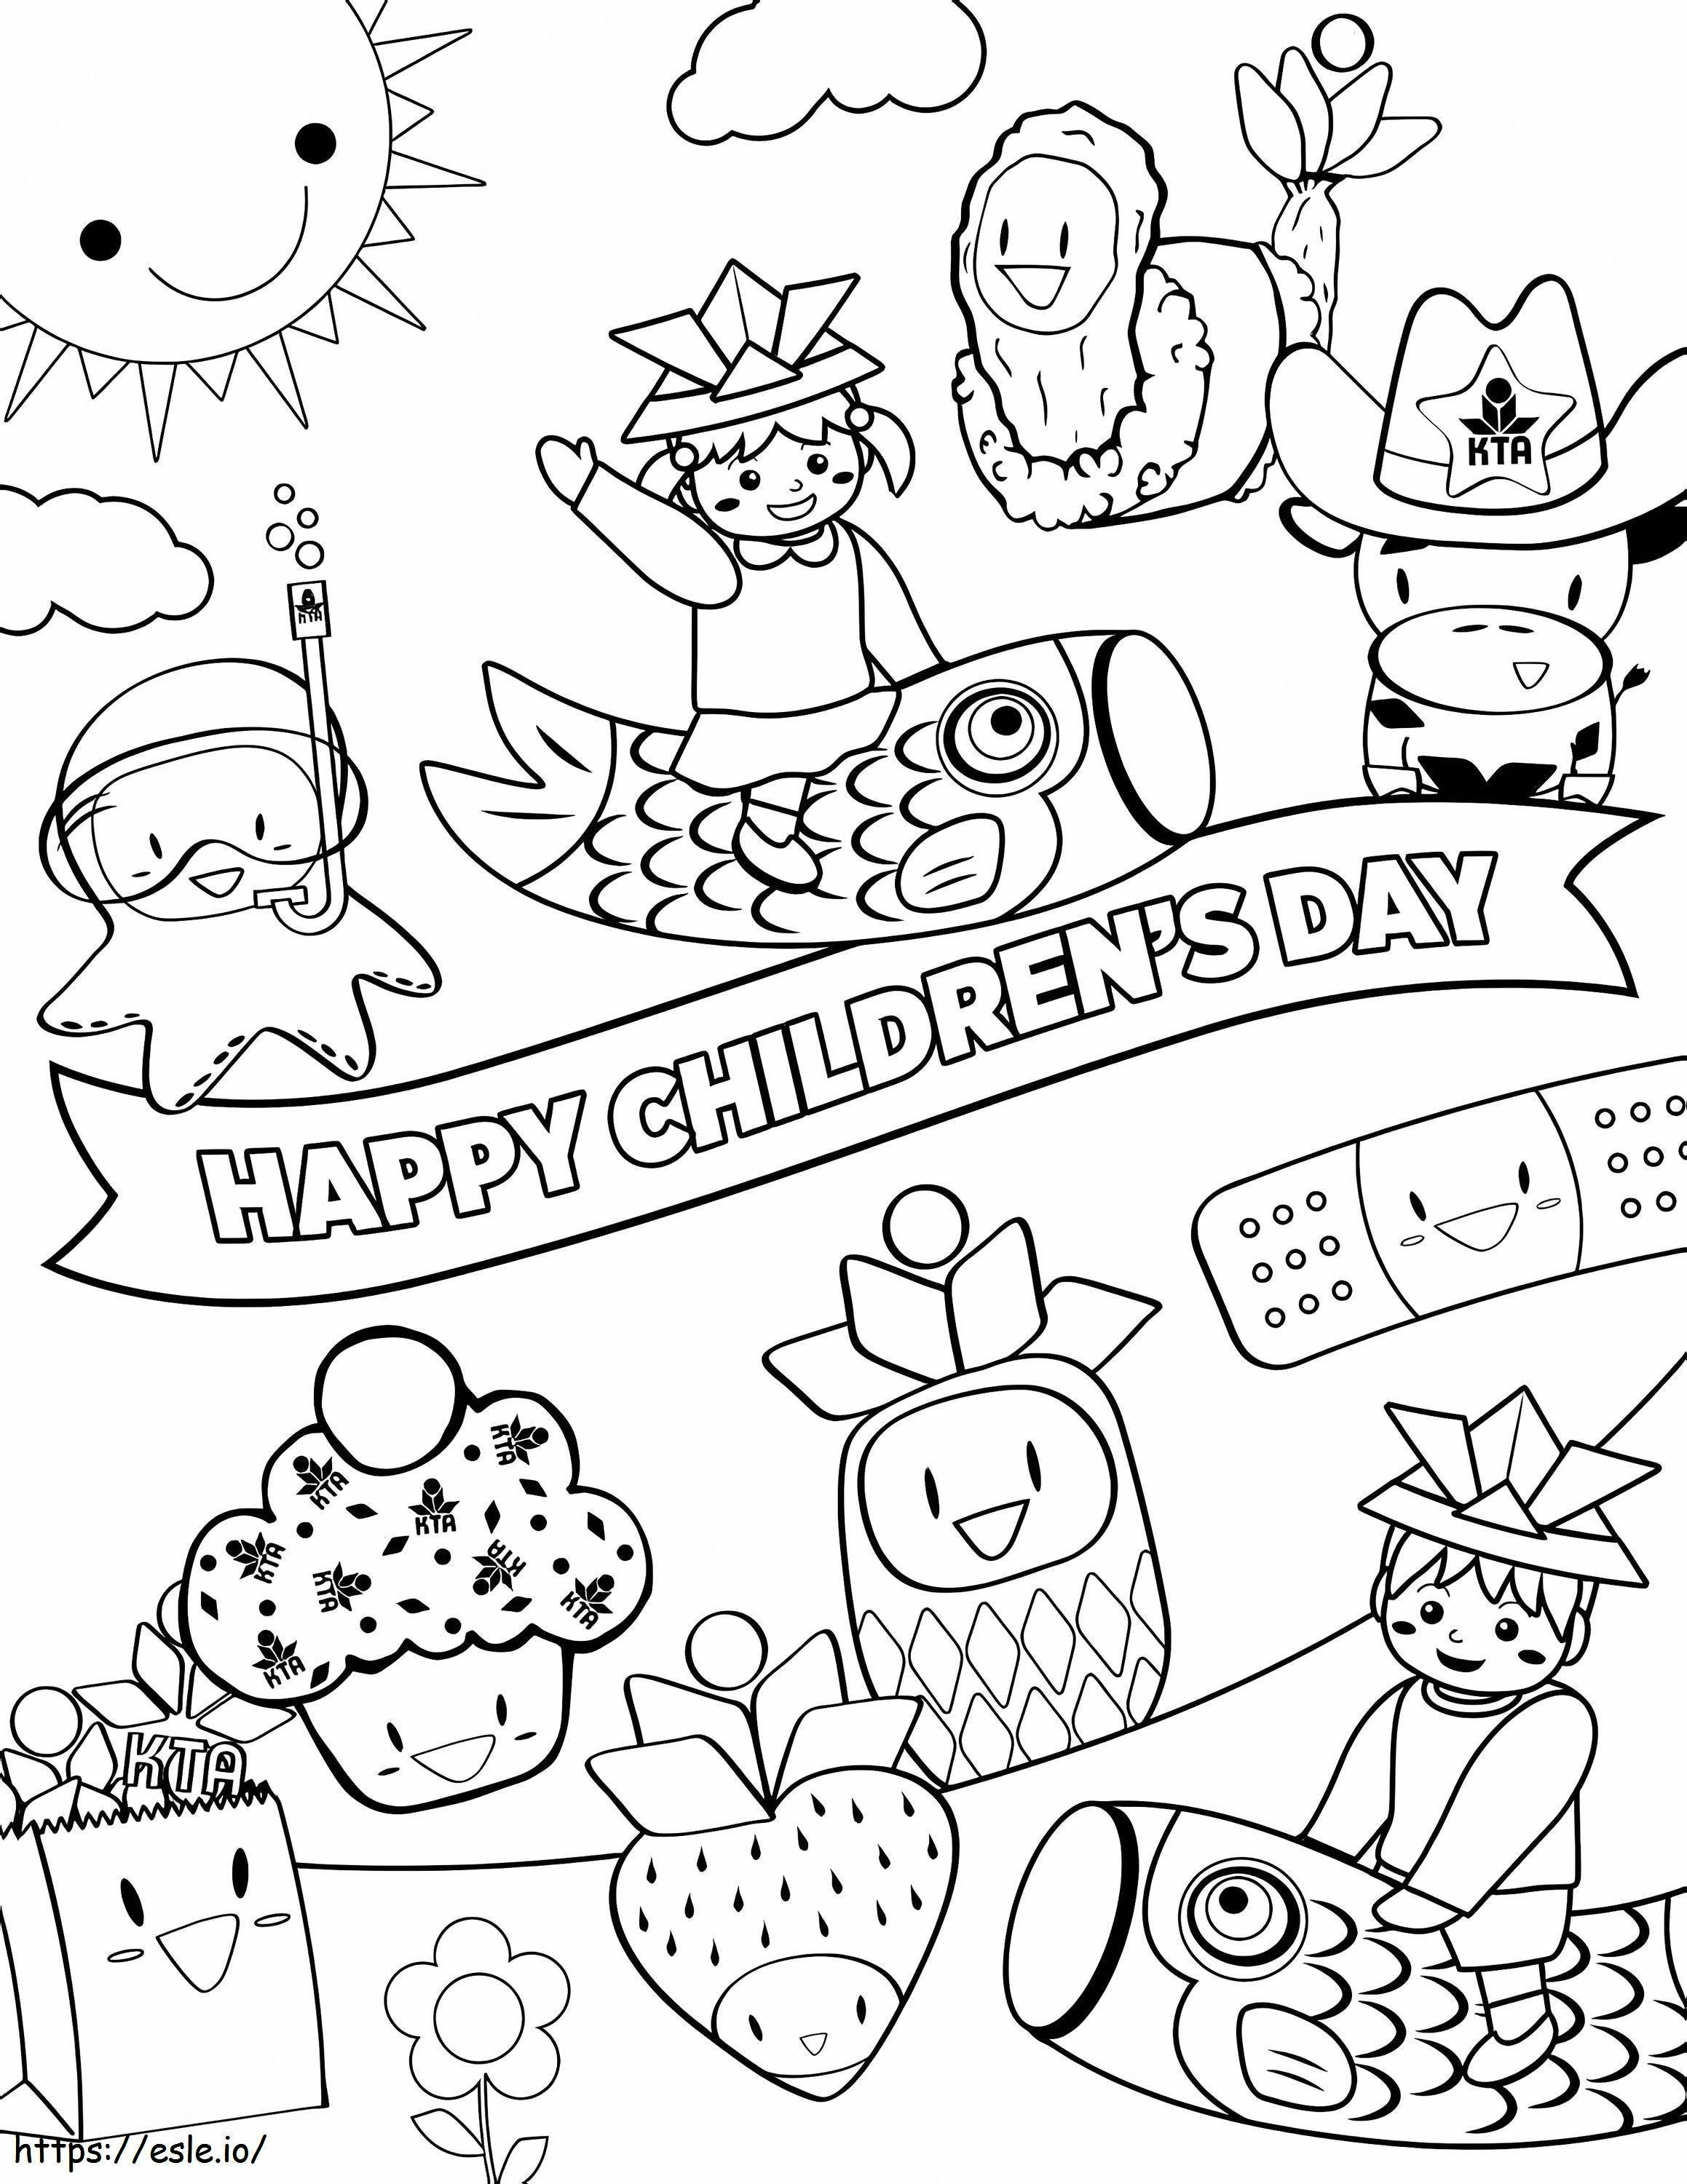 Happy Childrens Day 2 coloring page